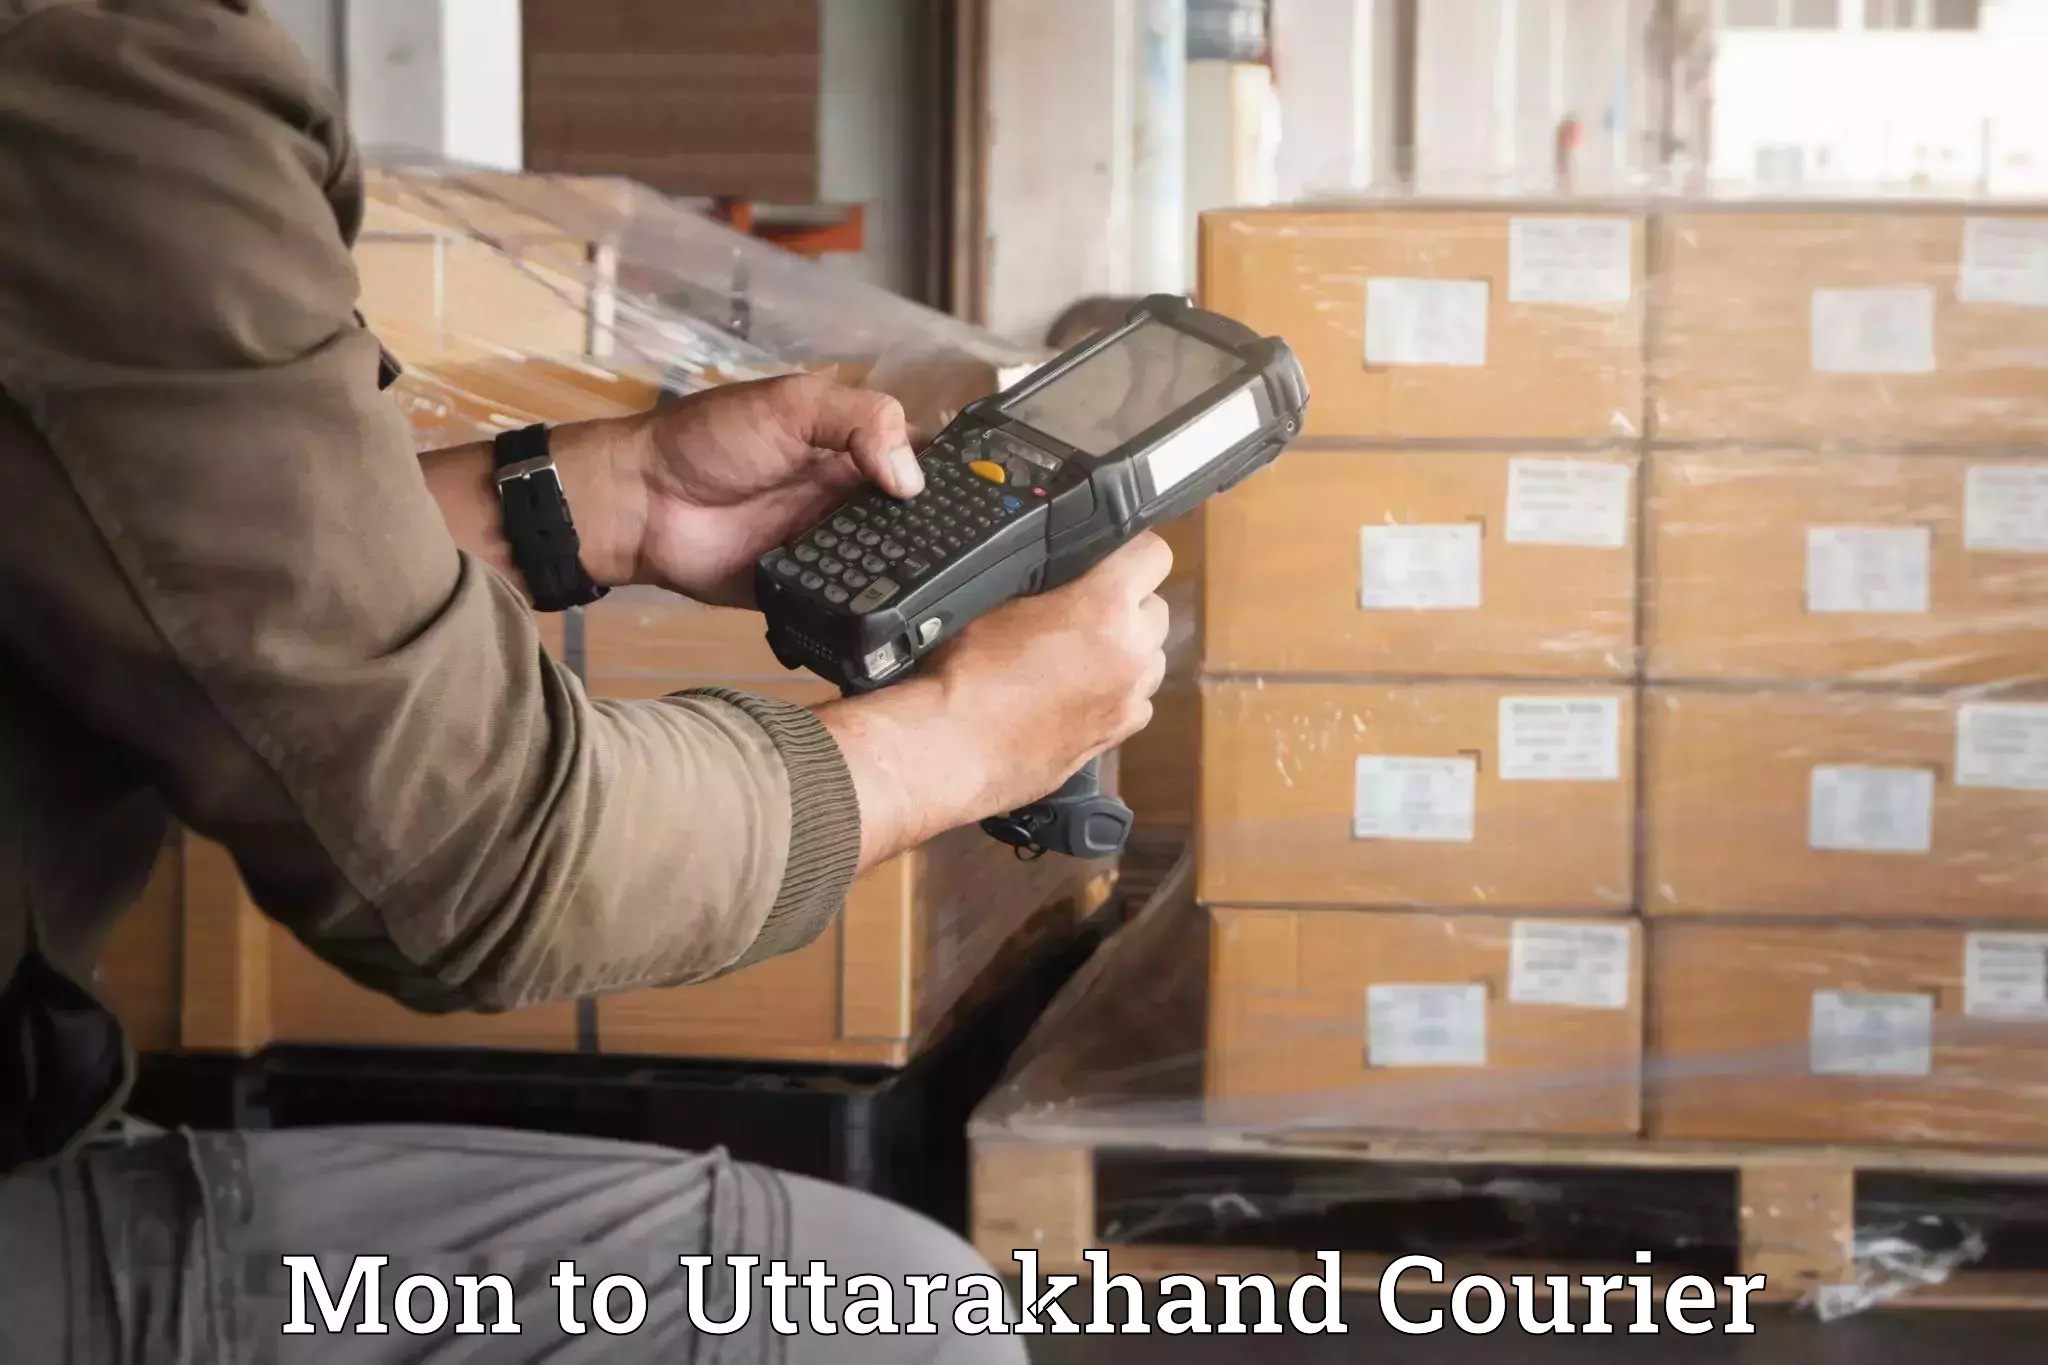 Home relocation experts Mon to Uttarakhand